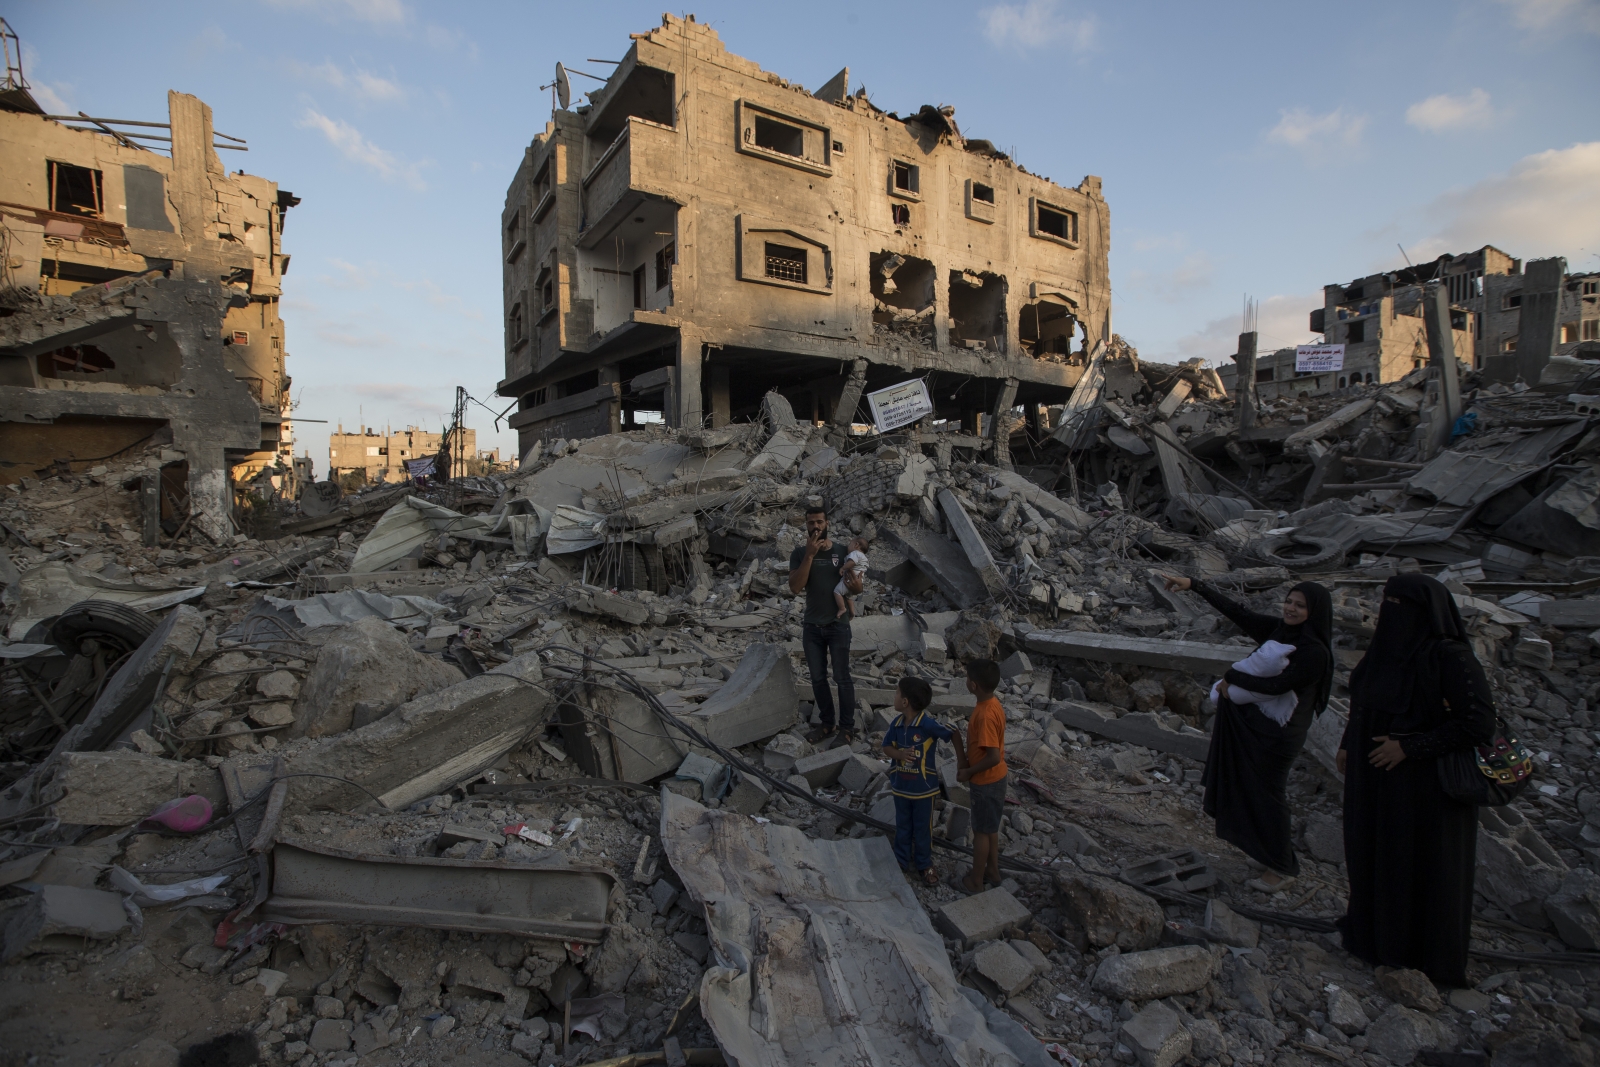 Gaza could be uninhabitable by 2020, claims new UN report1600 x 1067